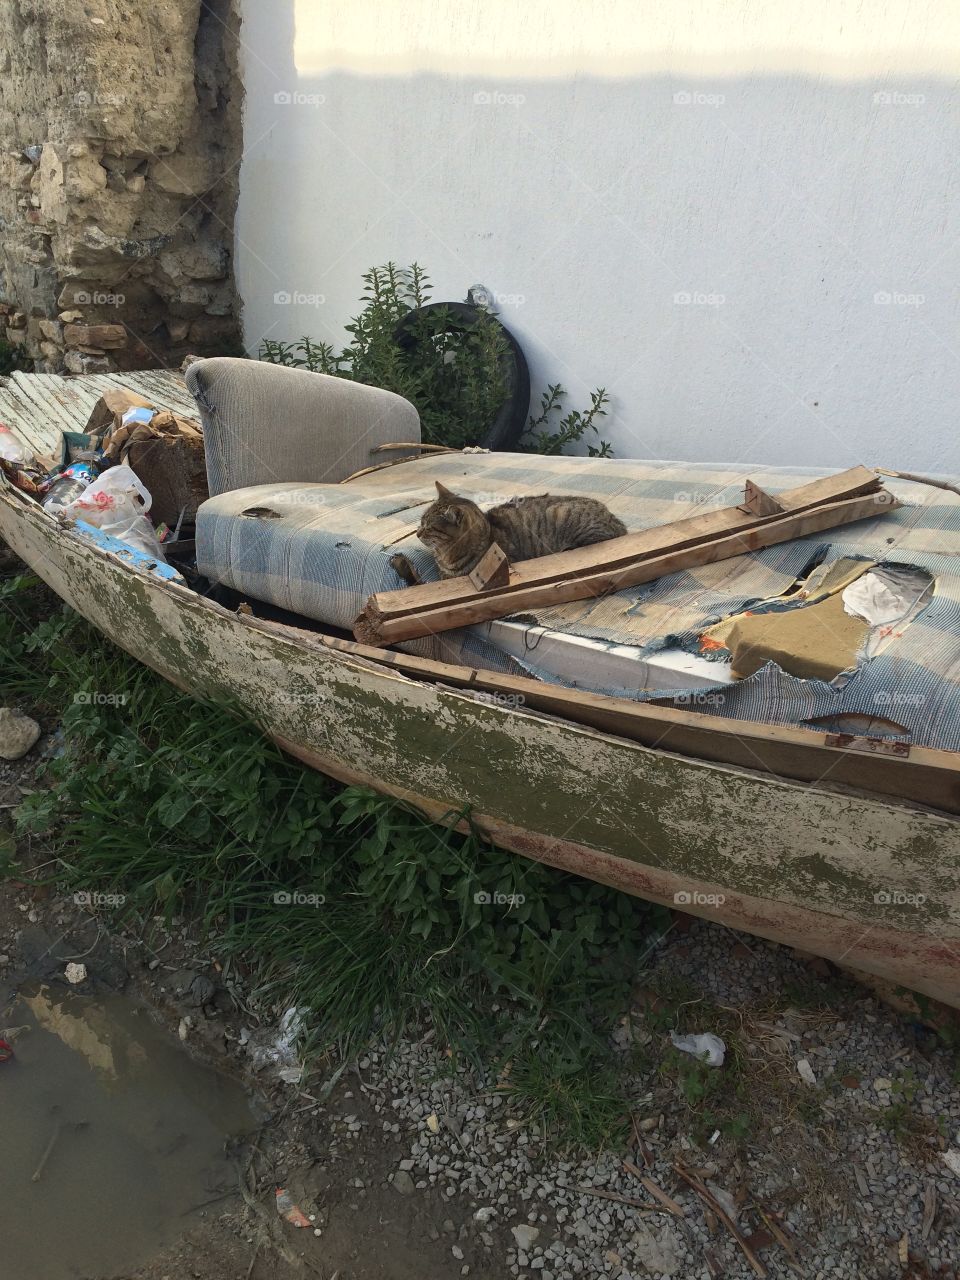 Cat sitting in Old Abandoned Boat with garbage